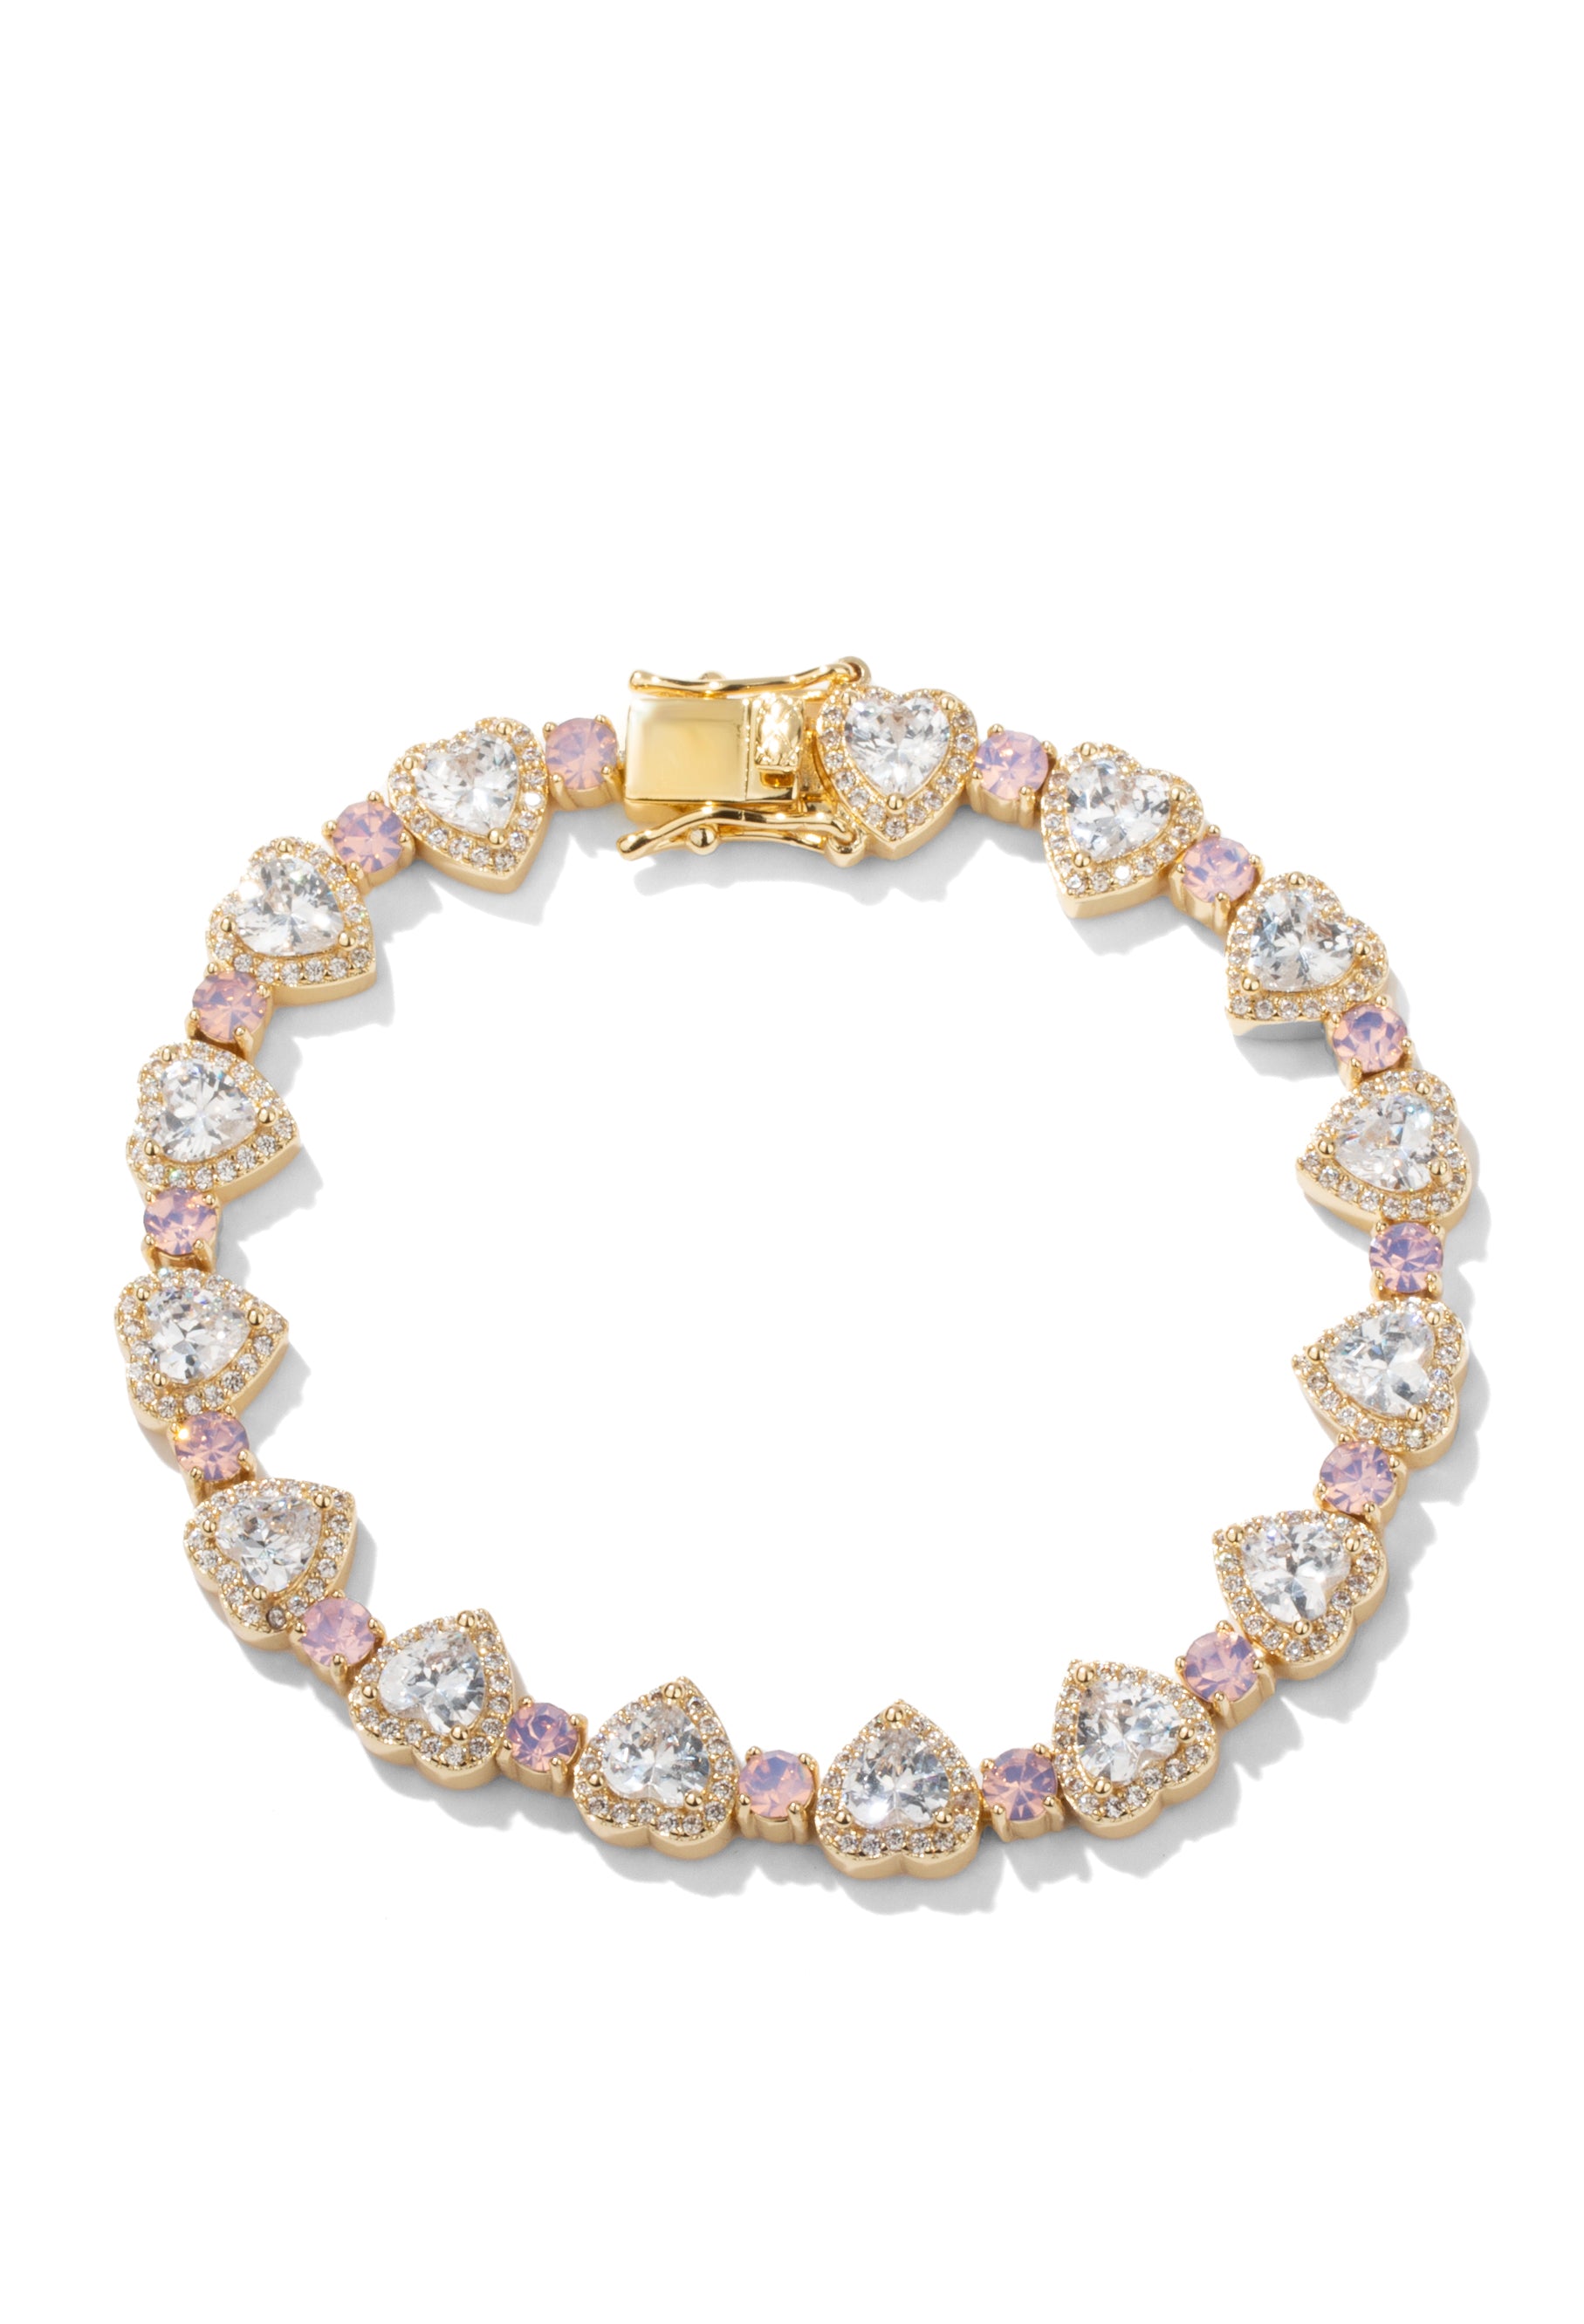 Gold Heart Tennis Bracelet w/ White Crystals & Pink Moonstone Crystals | Oomiay